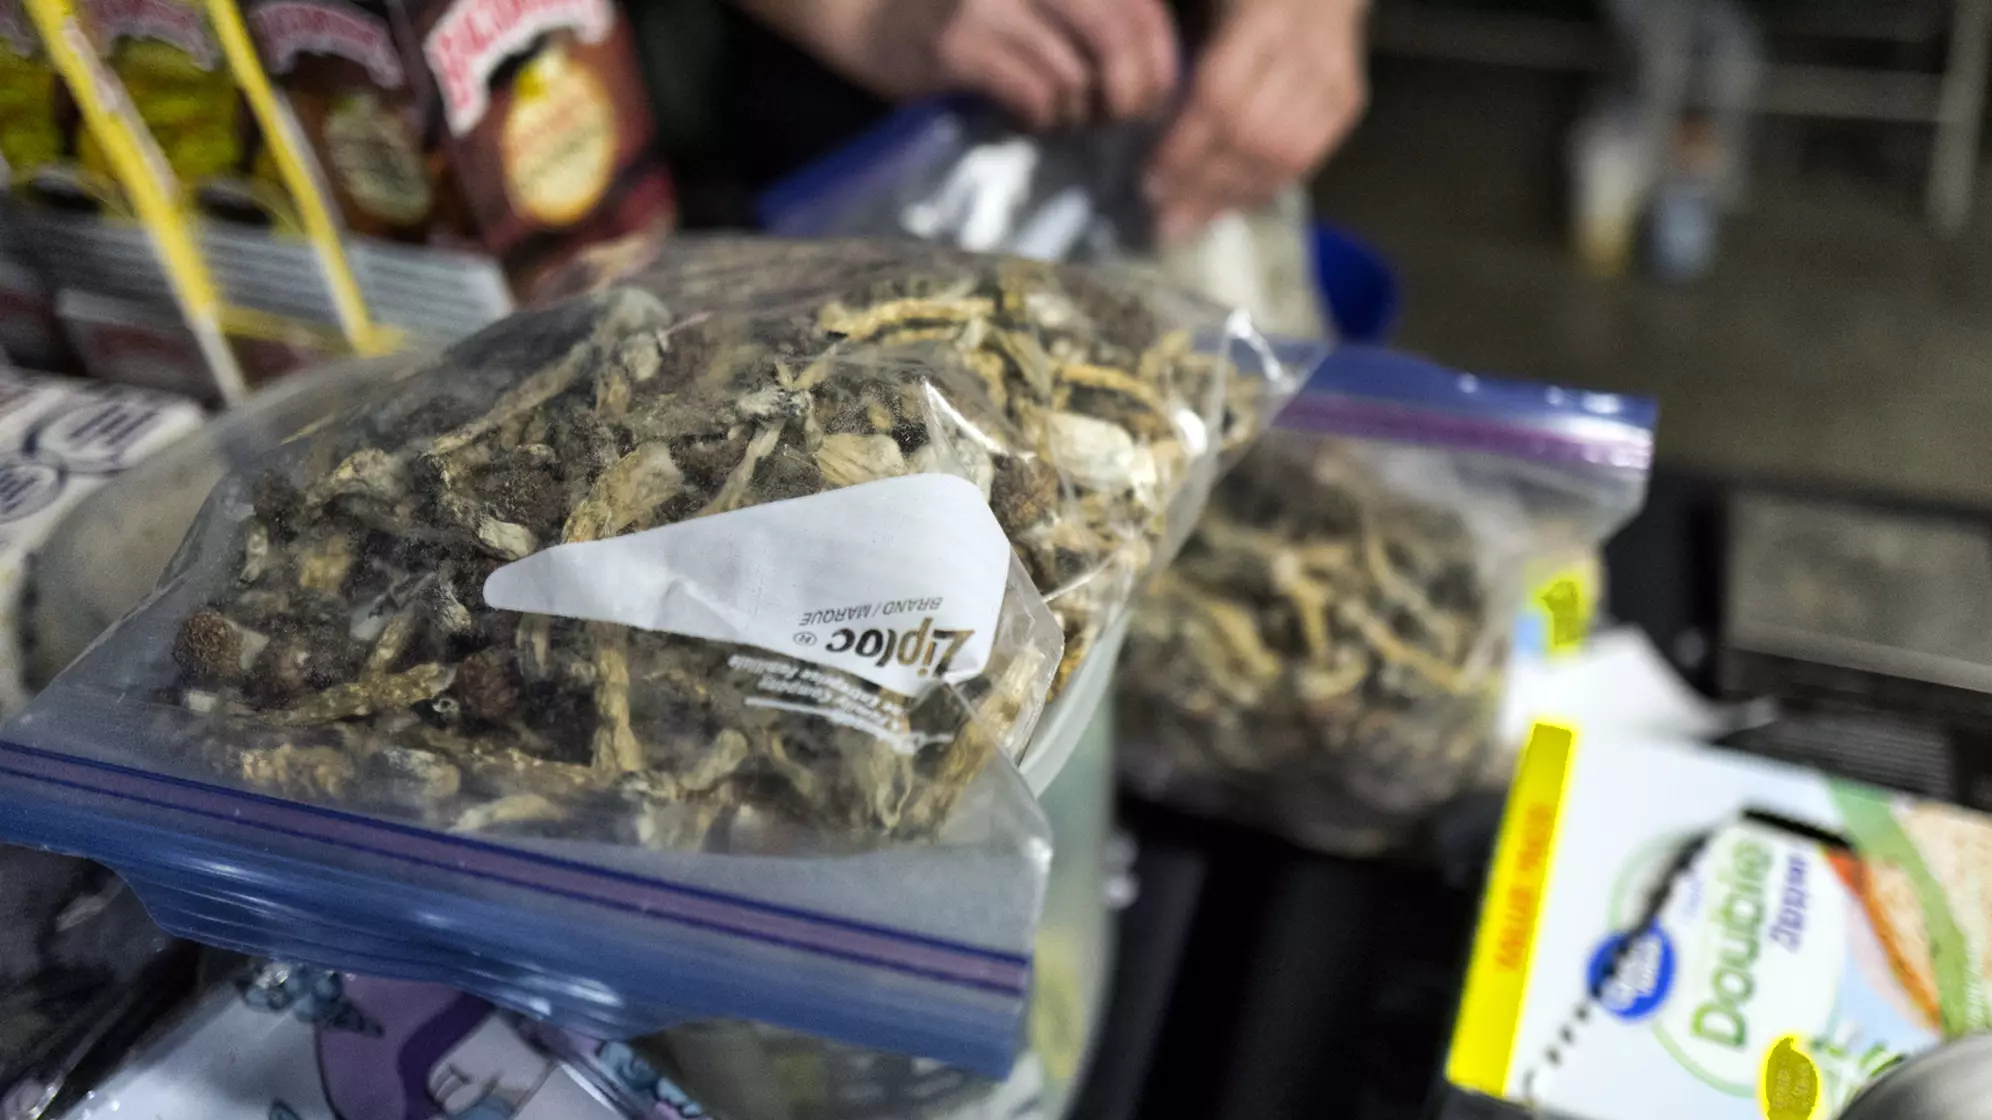 Denver Has Become The First City US City To Decriminalise 'Magic Mushrooms'